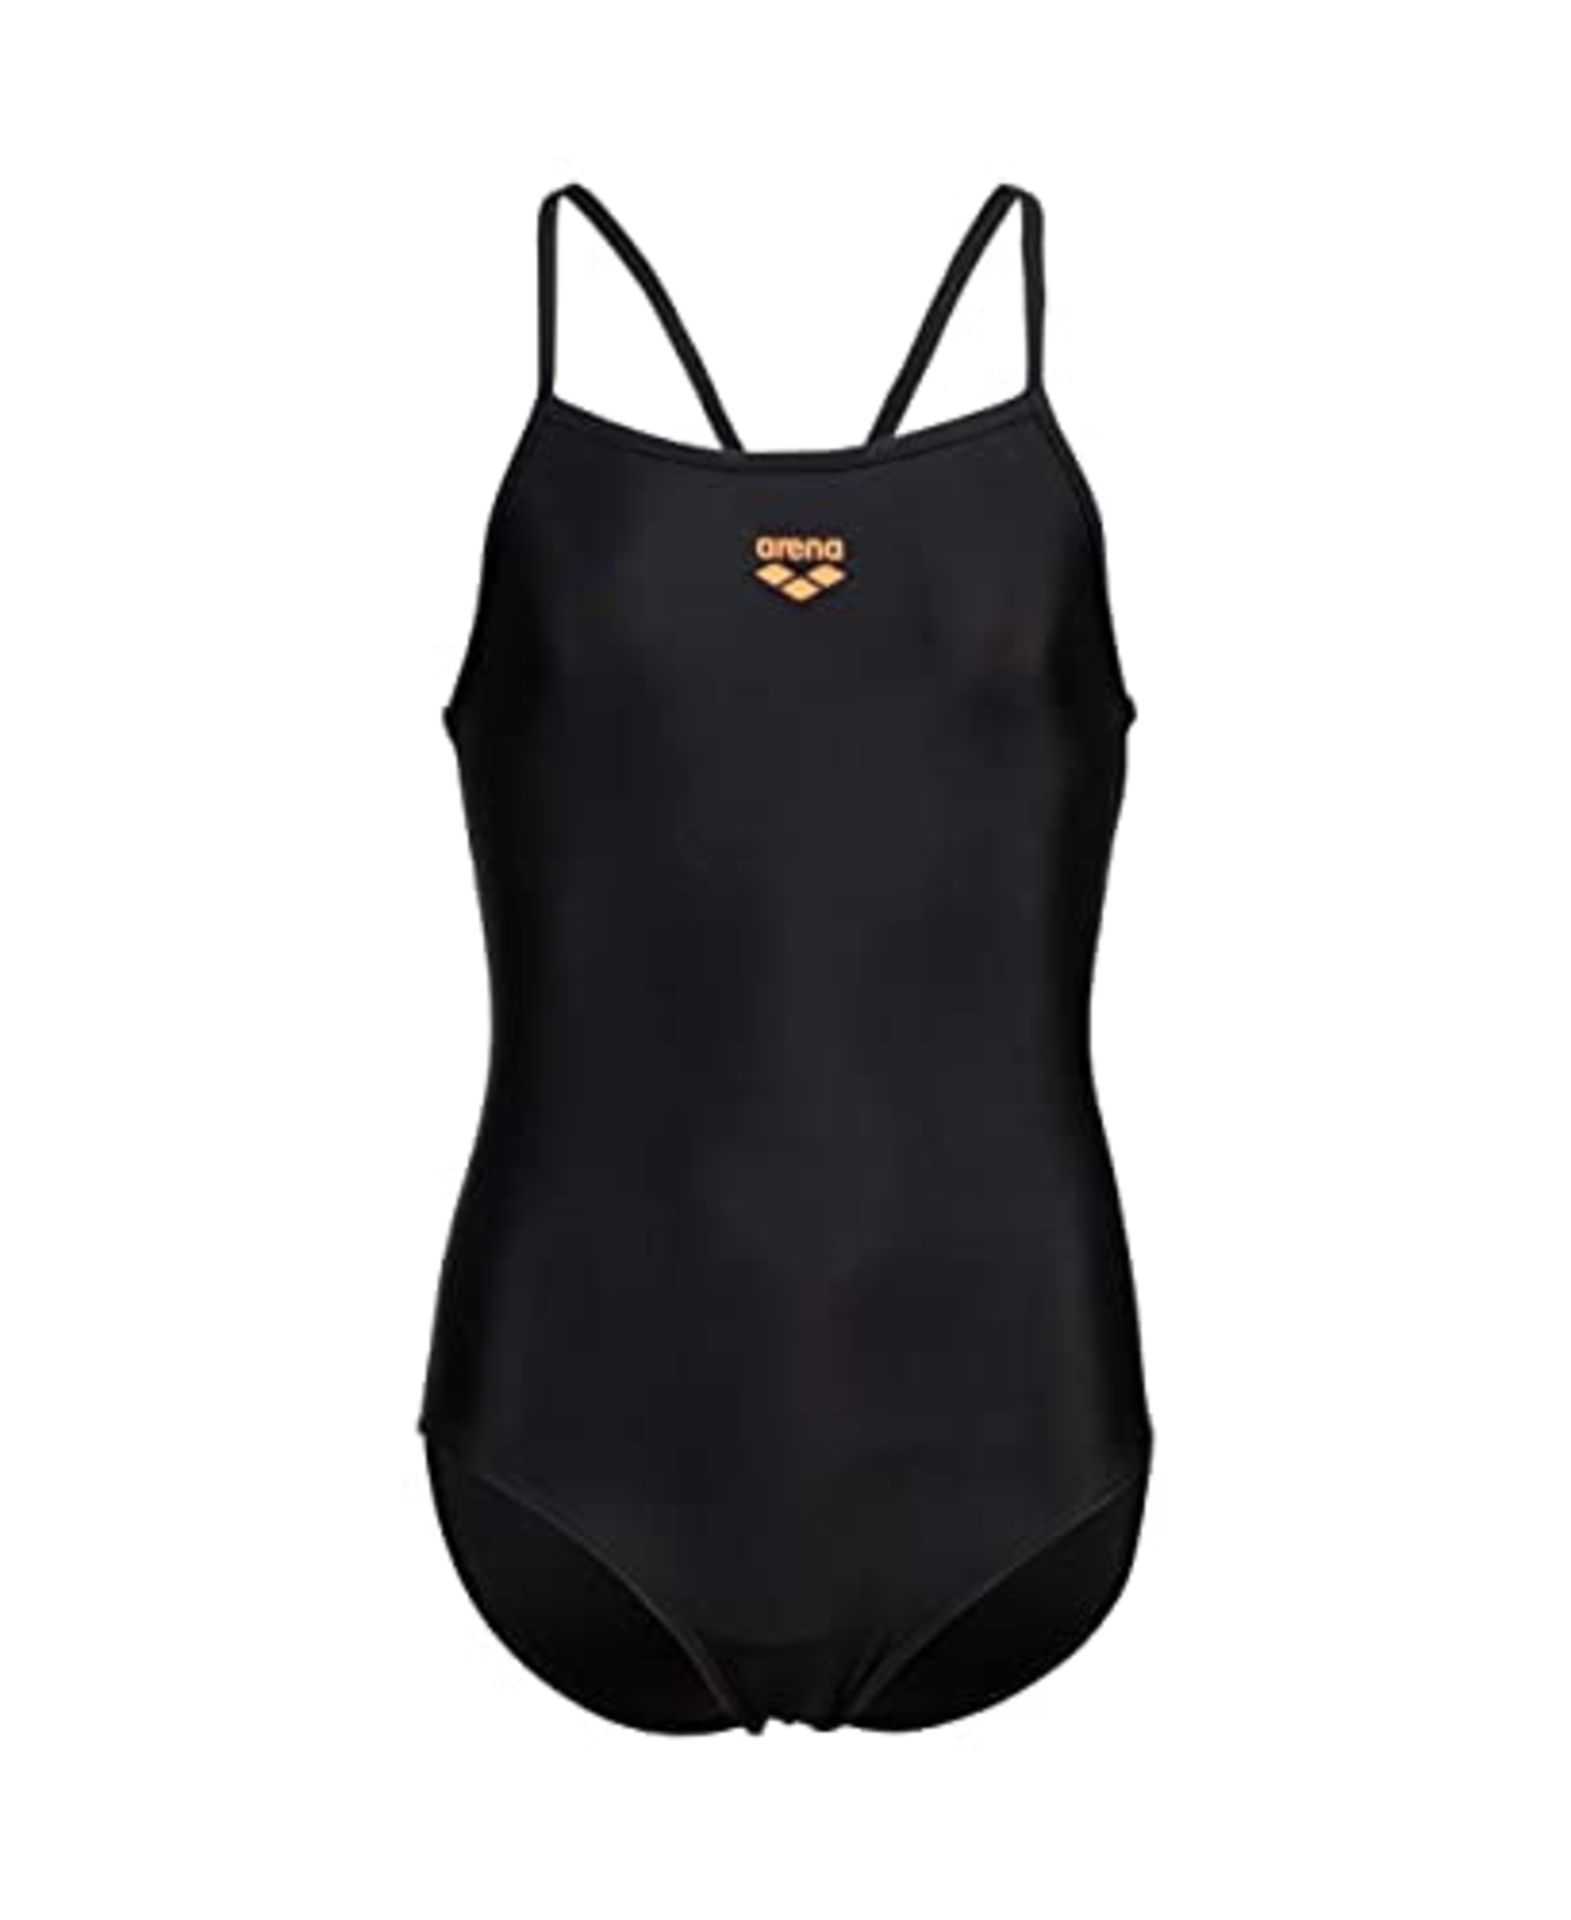 arena Feel Light Drop Back Solid Girls' One-piece Swimsuit, Quick-drying, Sporty Swimw